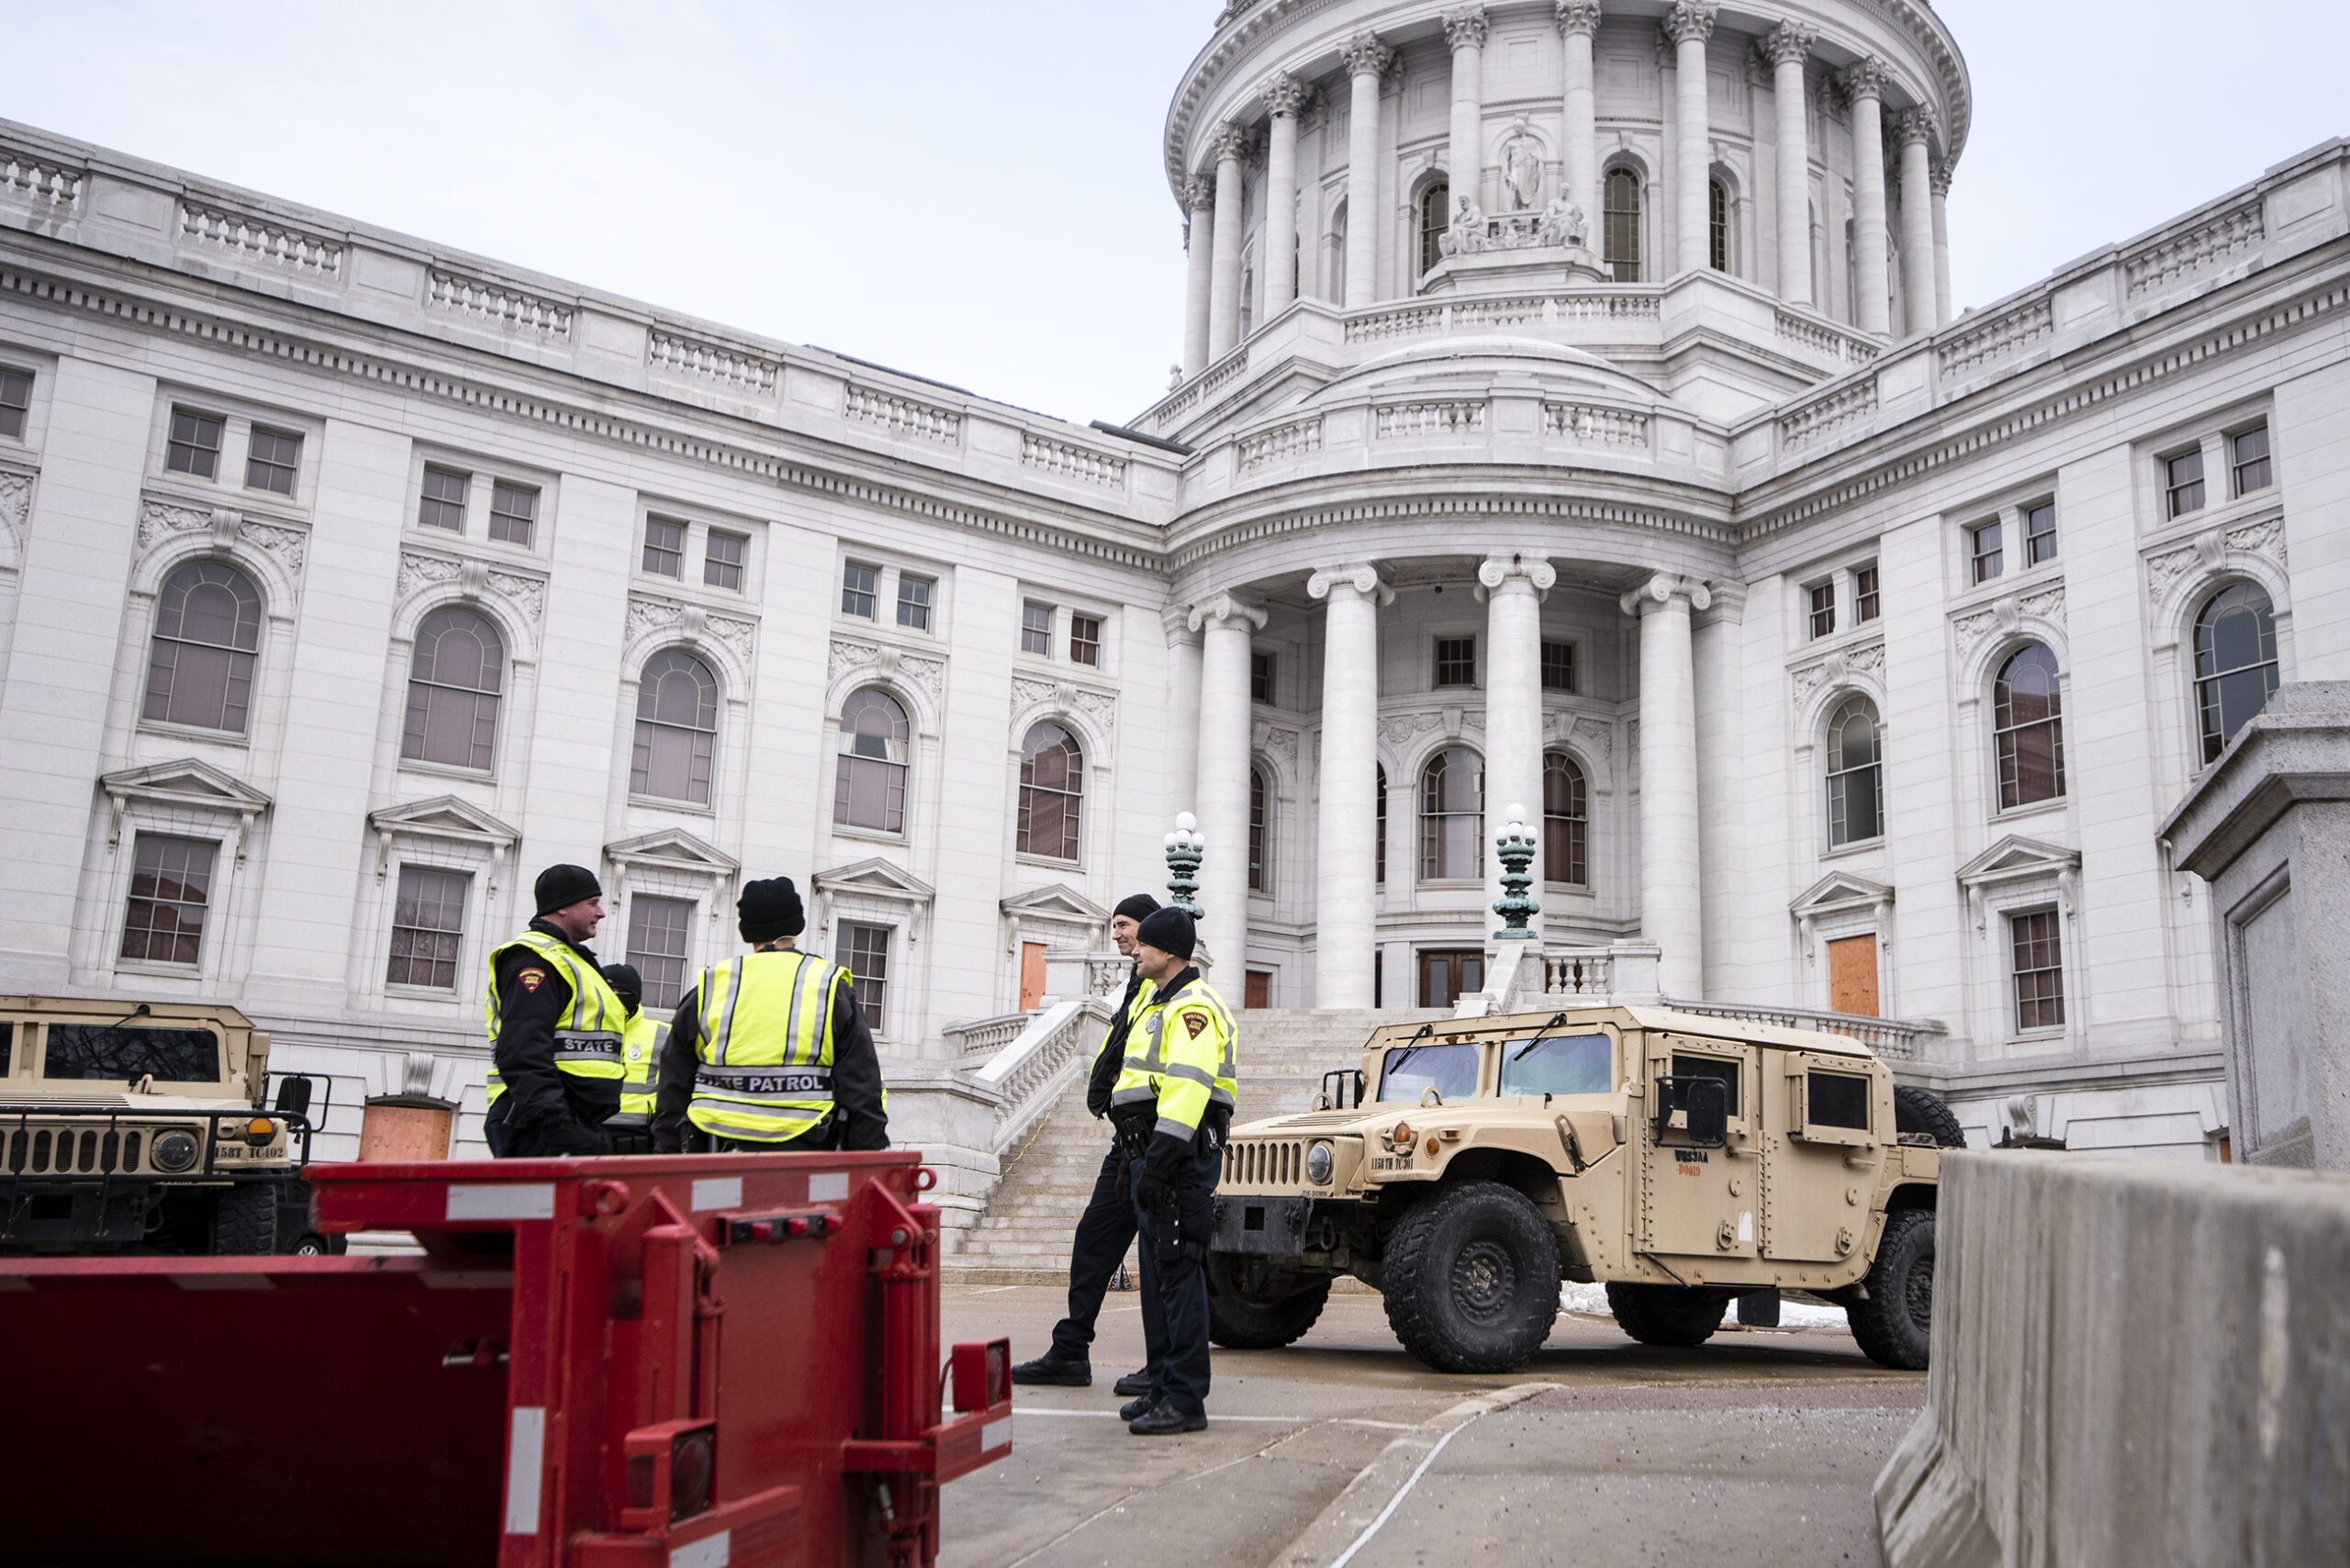 Police in neon vests stand near a national guard vehicle outside the capitol